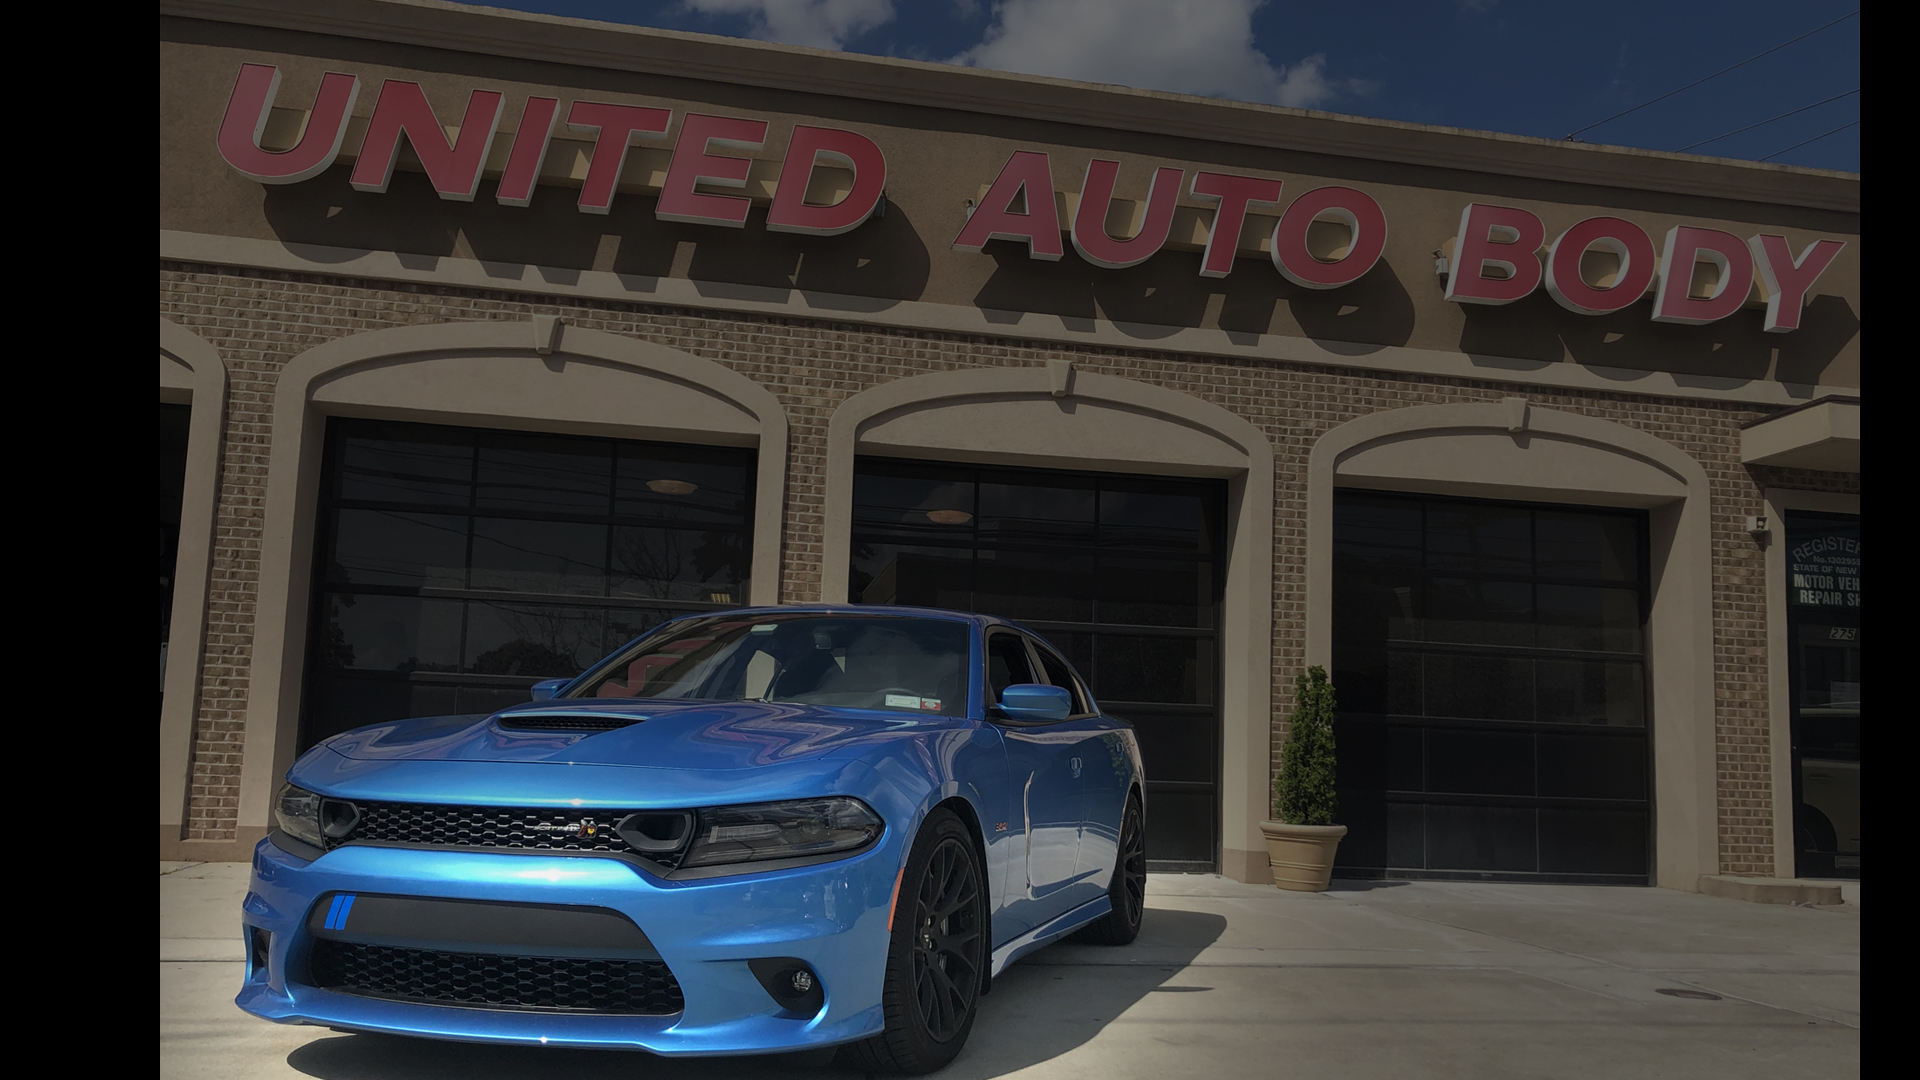 United Auto Body Shop Front Office Image